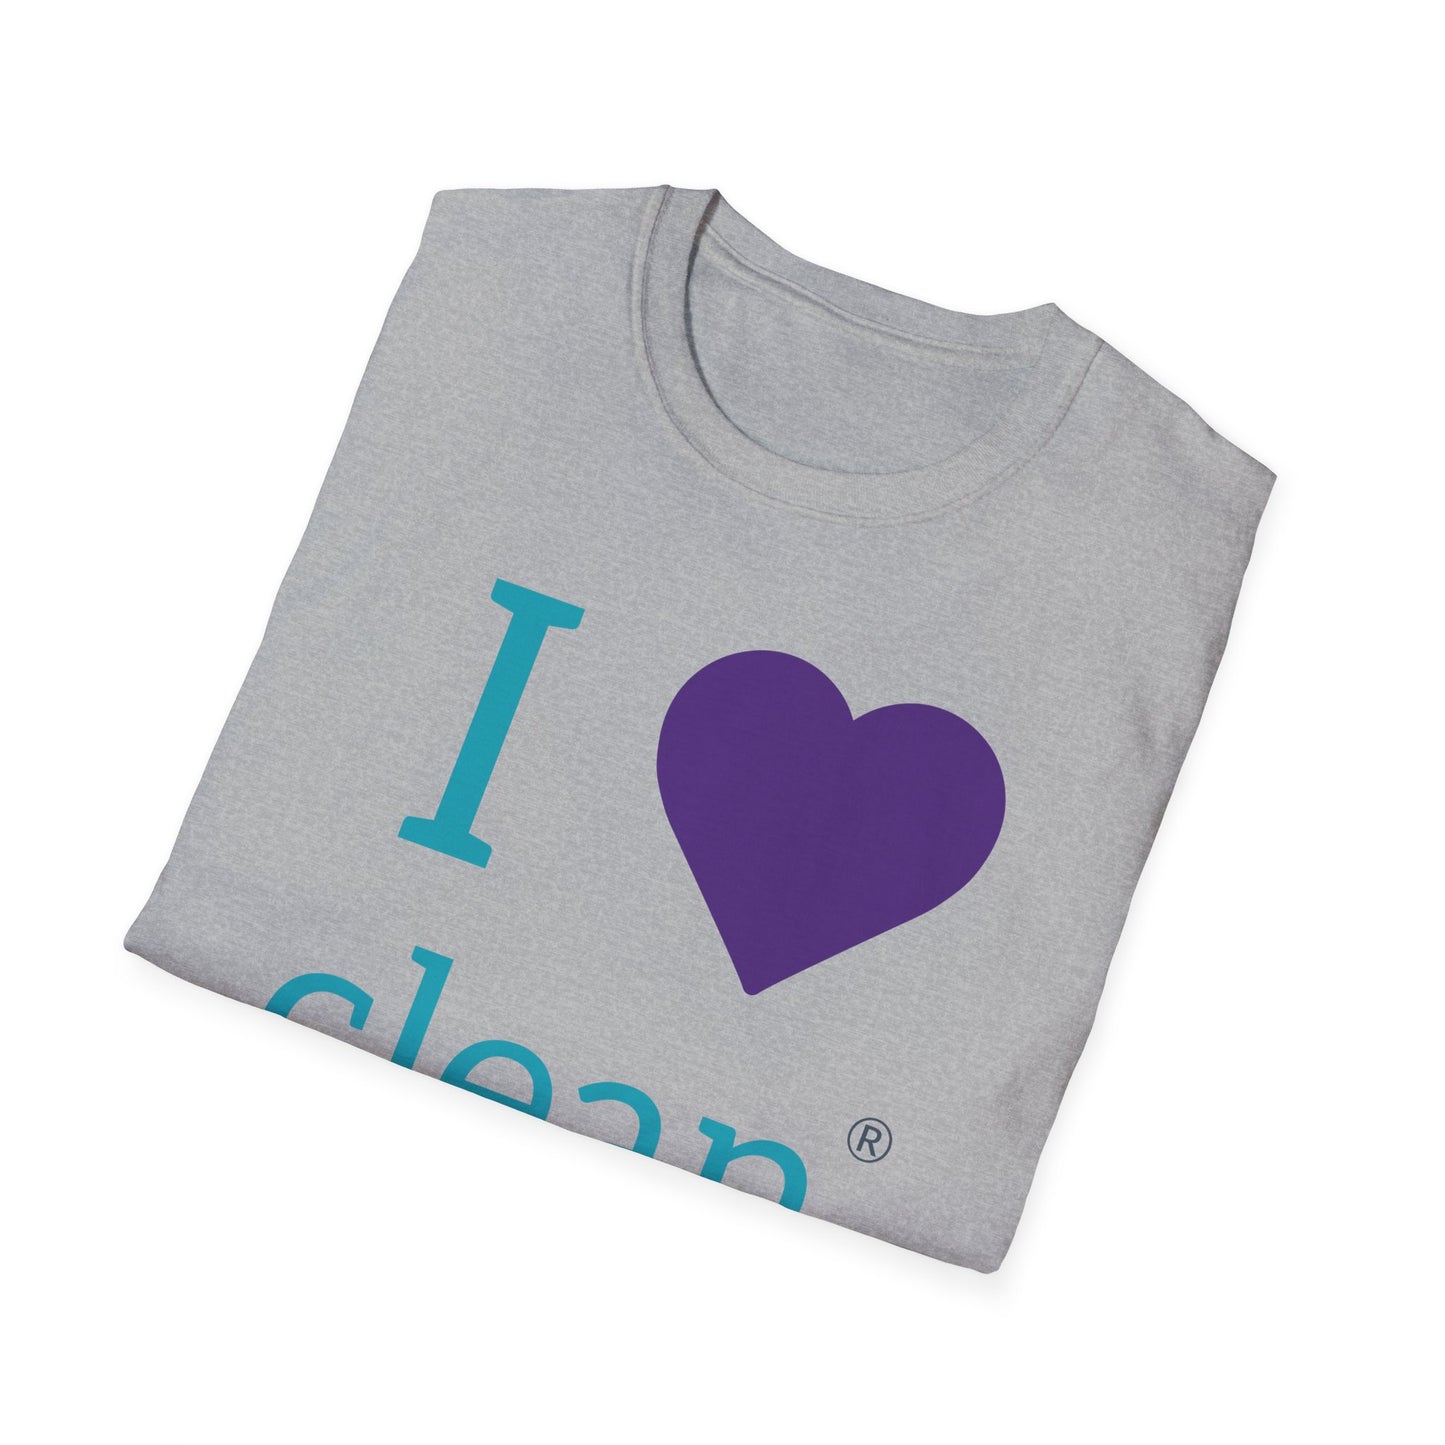 I Love Clean Softstyle T-Shirt